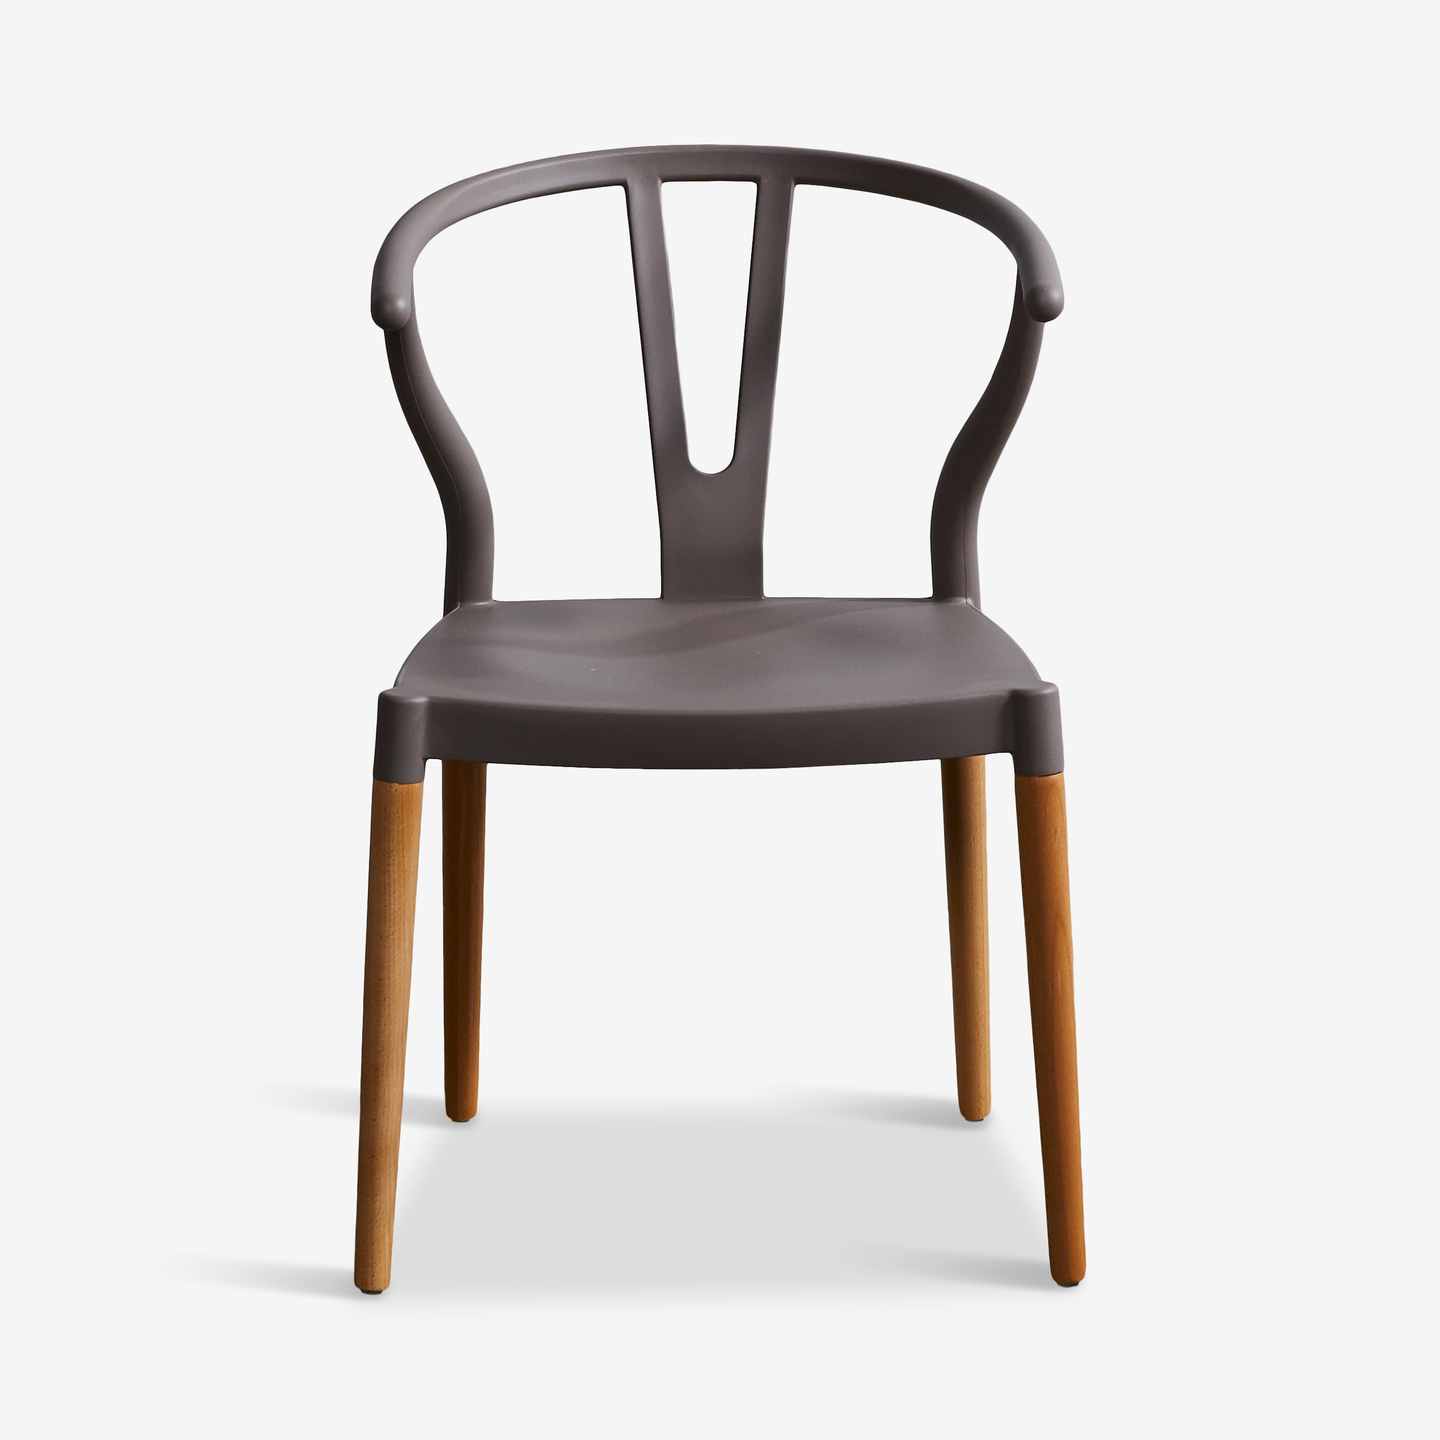 671_Wexler-Dining-Chair-Grey_Flat-Front_Industrial_Dining-Room-17 2020